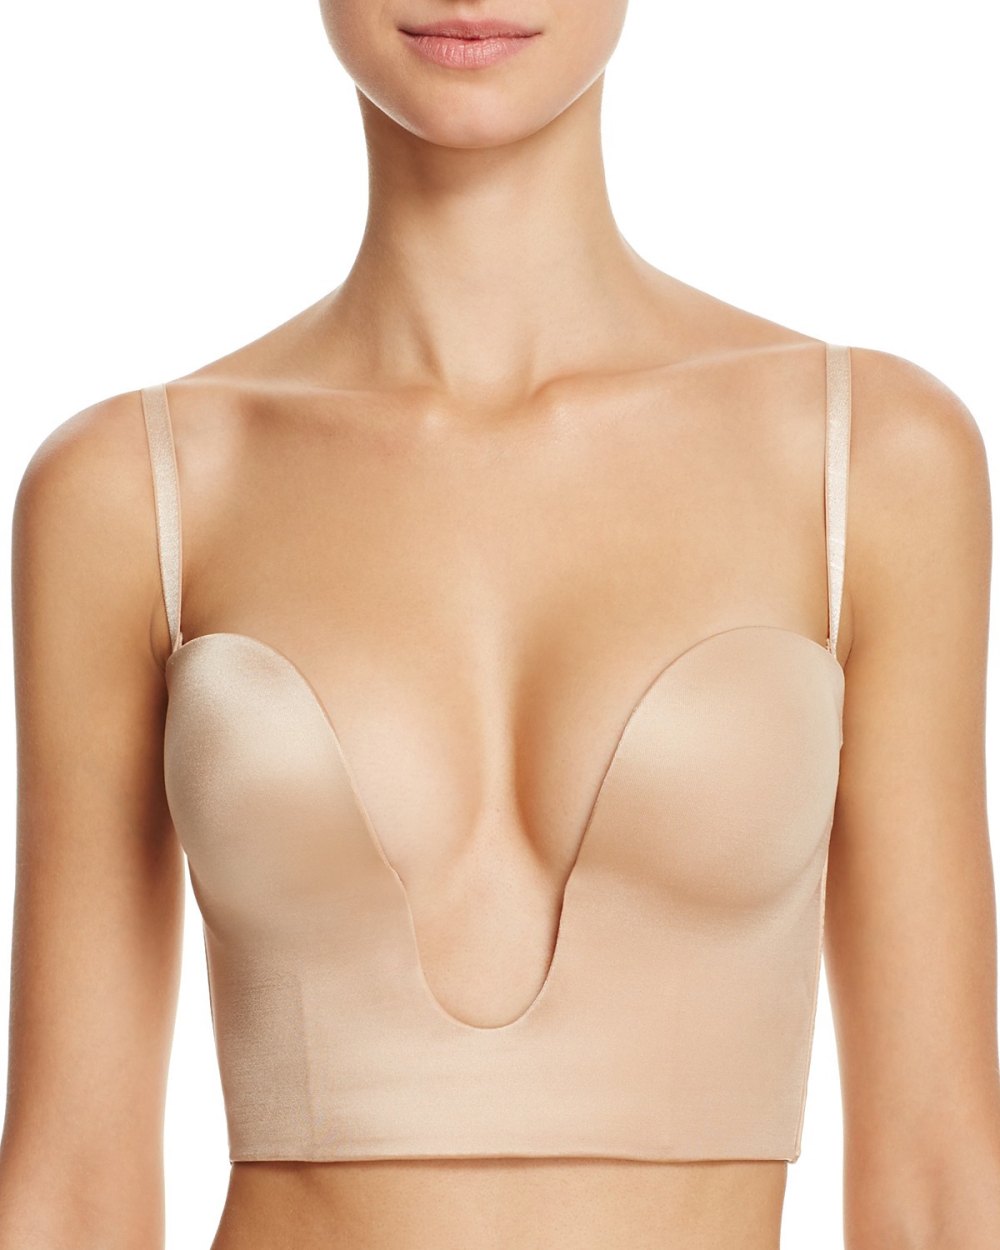 This $54 Plunge Bra Solves All Your Dress Dilemmas